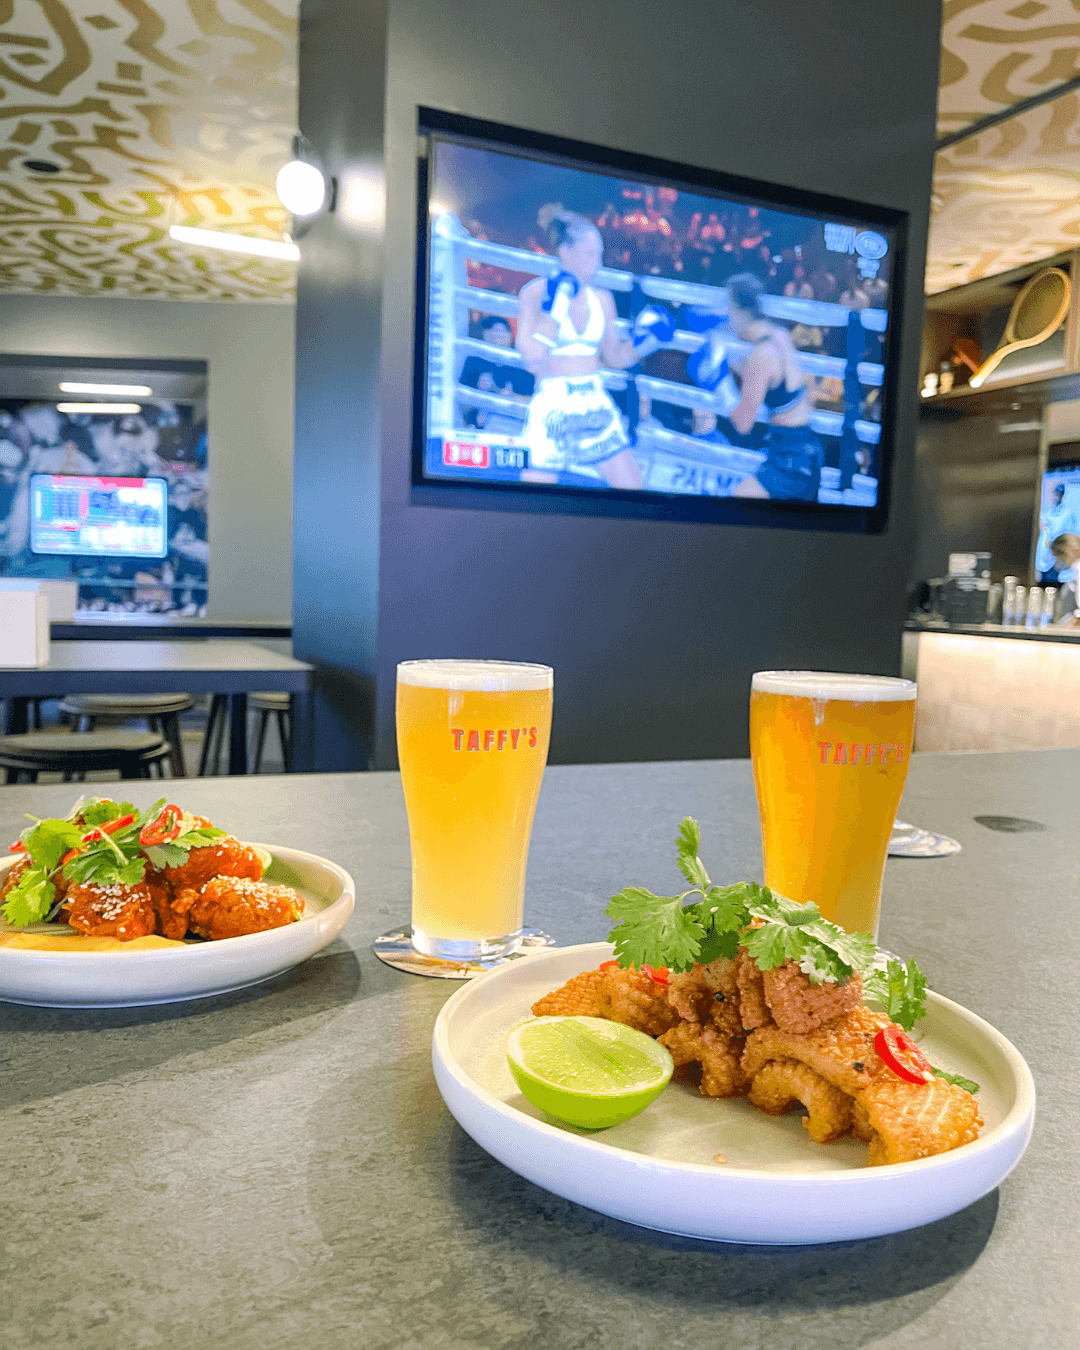 fresh beers and asian food on table at sports bar